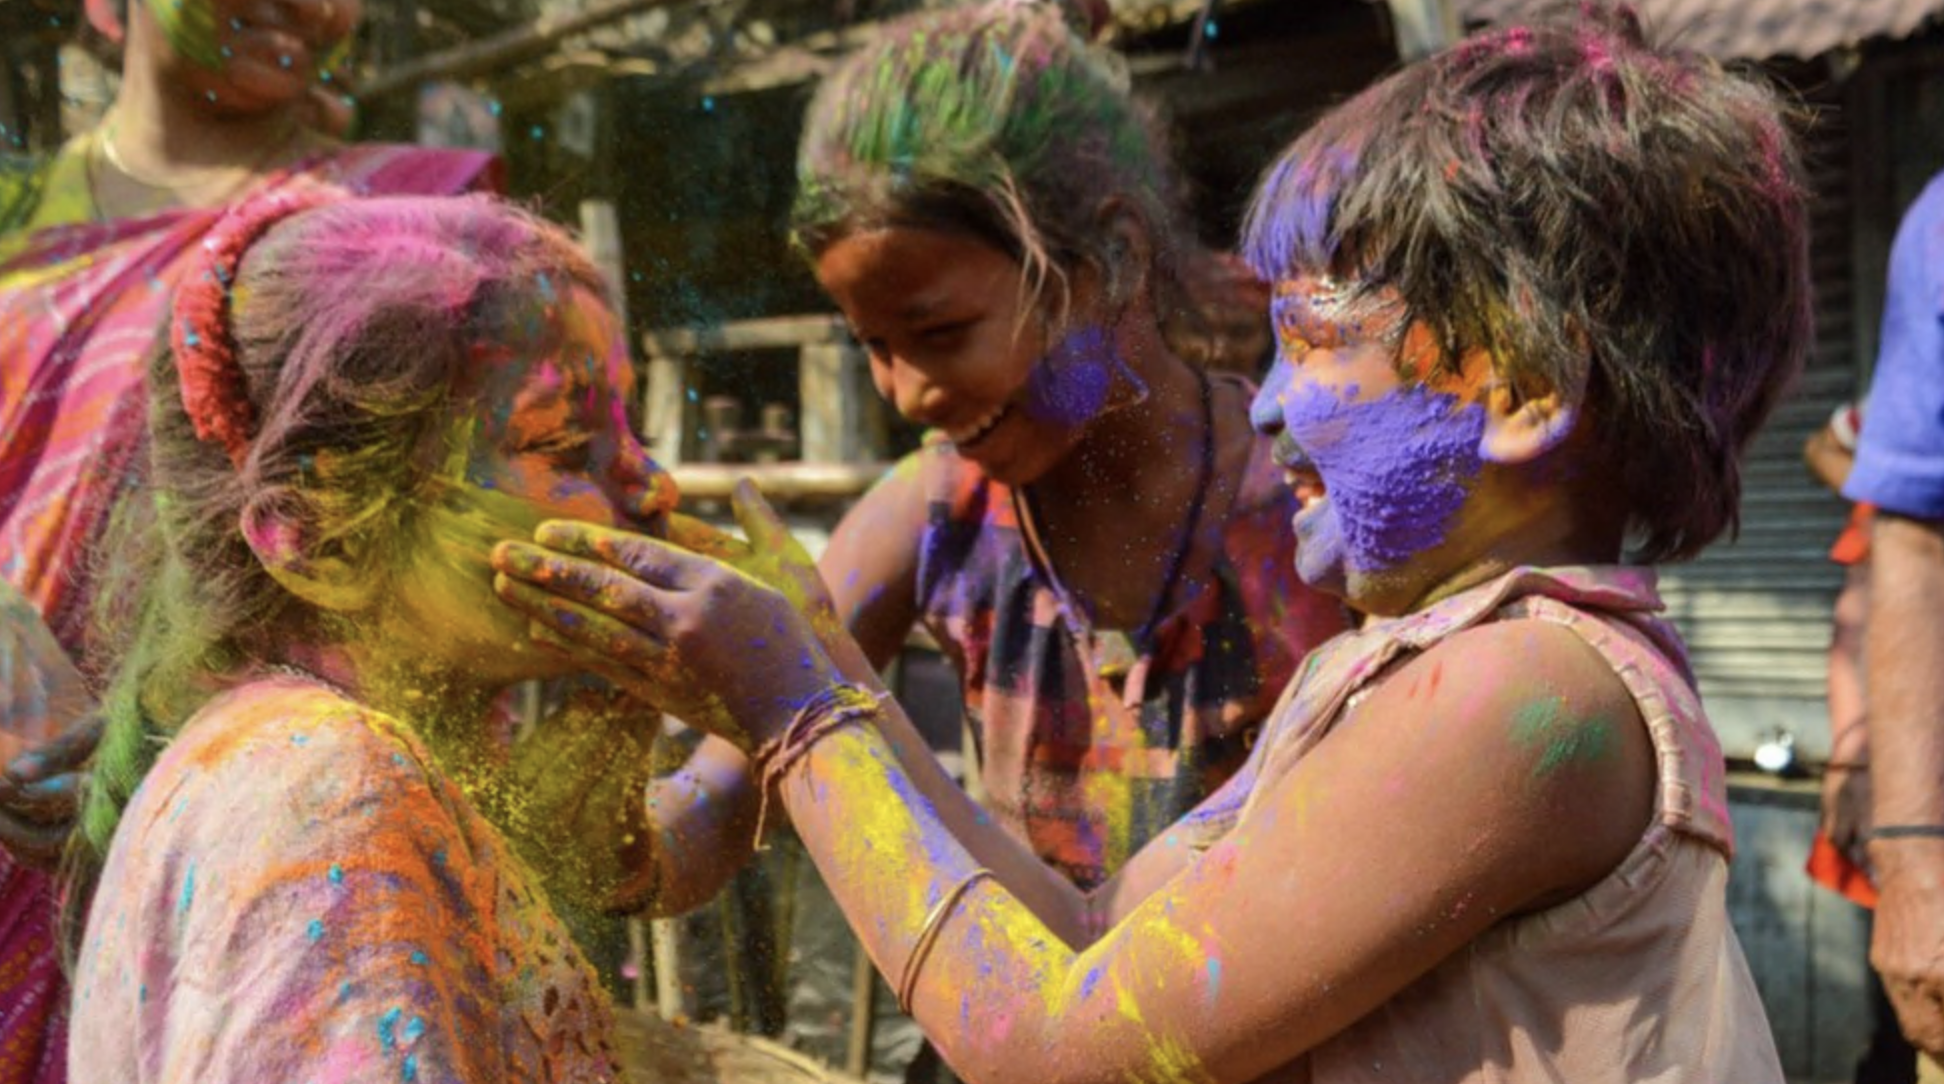 Two girls are seen smearing each other with coloured powder